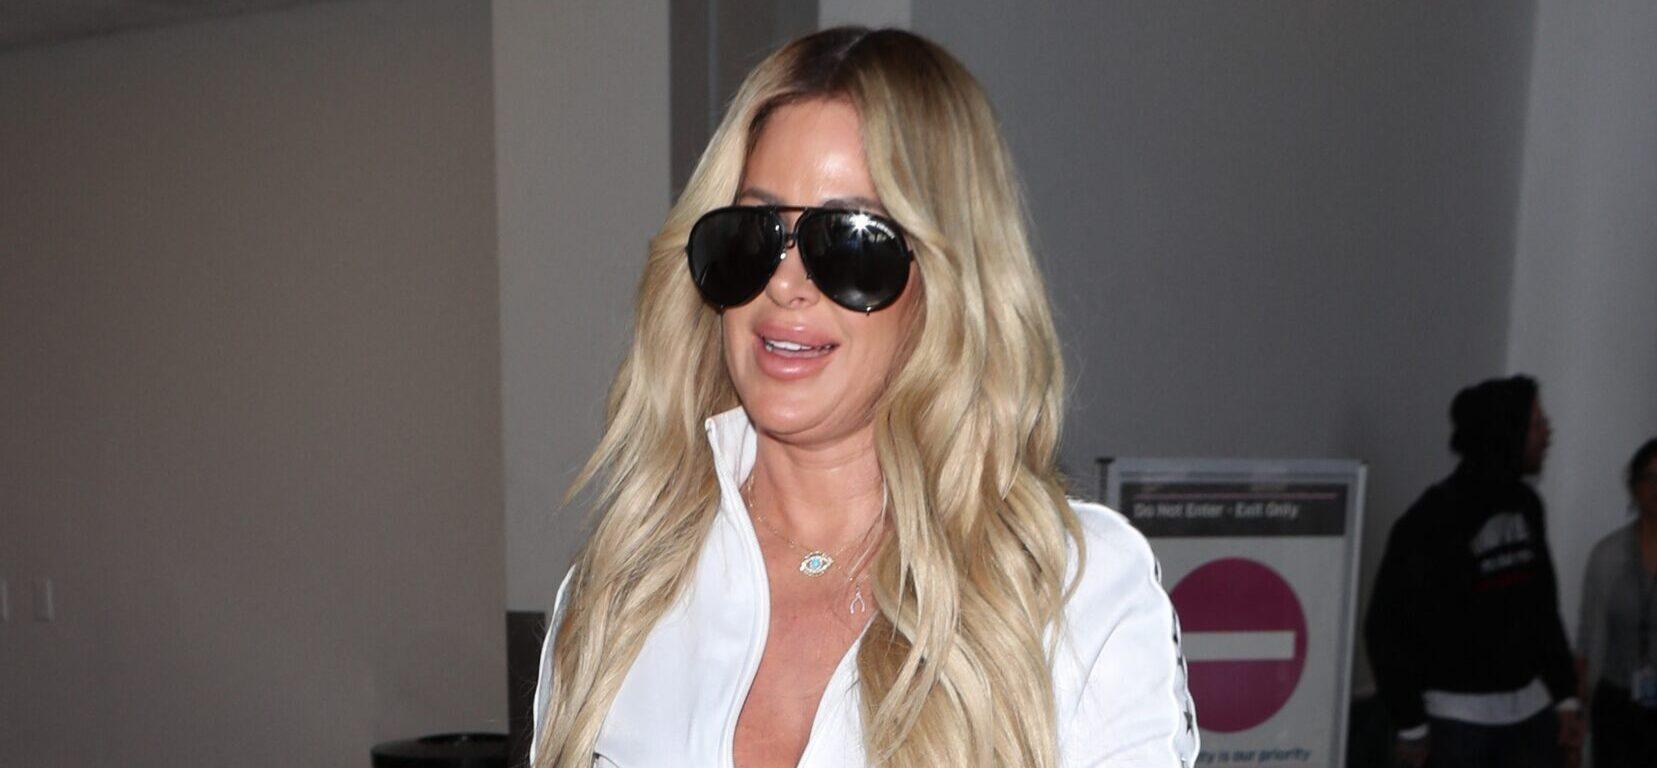 Kim Zolciak-Biermann Answers Fan Questions About Her Life Amid New Divorce Filing